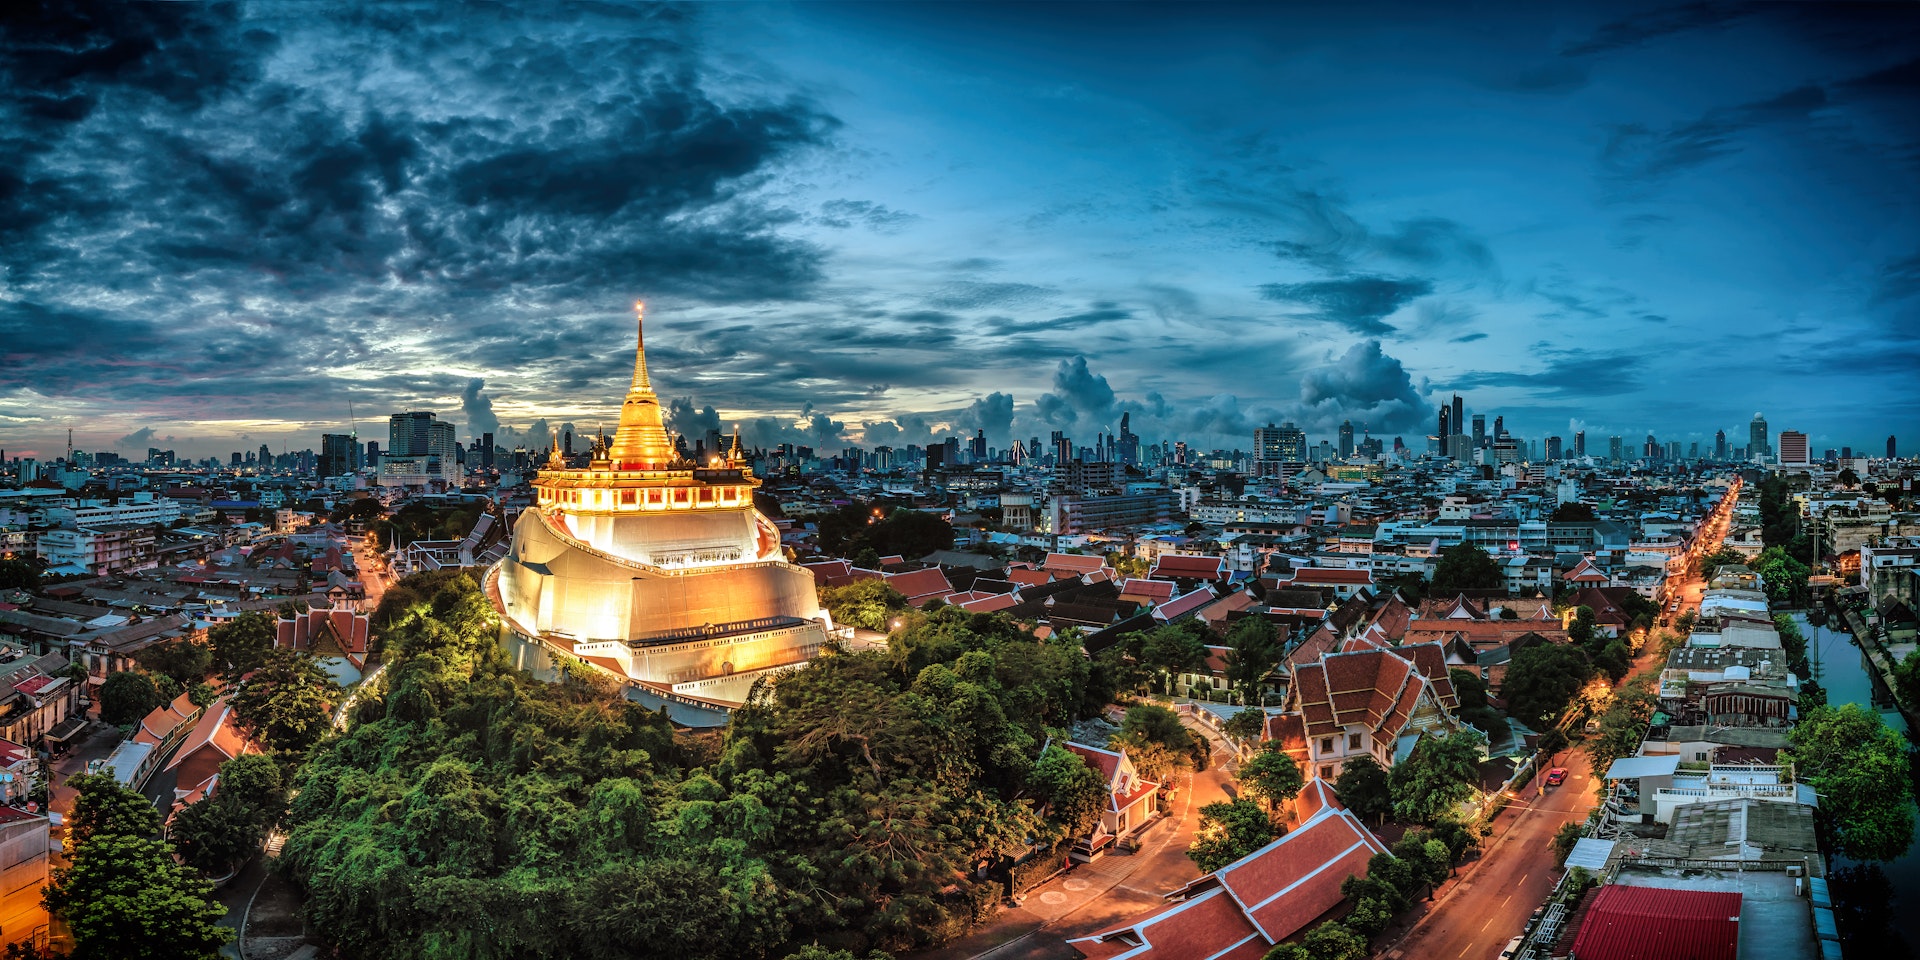 Wat Saket, The Golden Mount Temple in Bangkok, Thailand is lit up against a grey cloudy sky and the dark houses and skyscrapers of the city